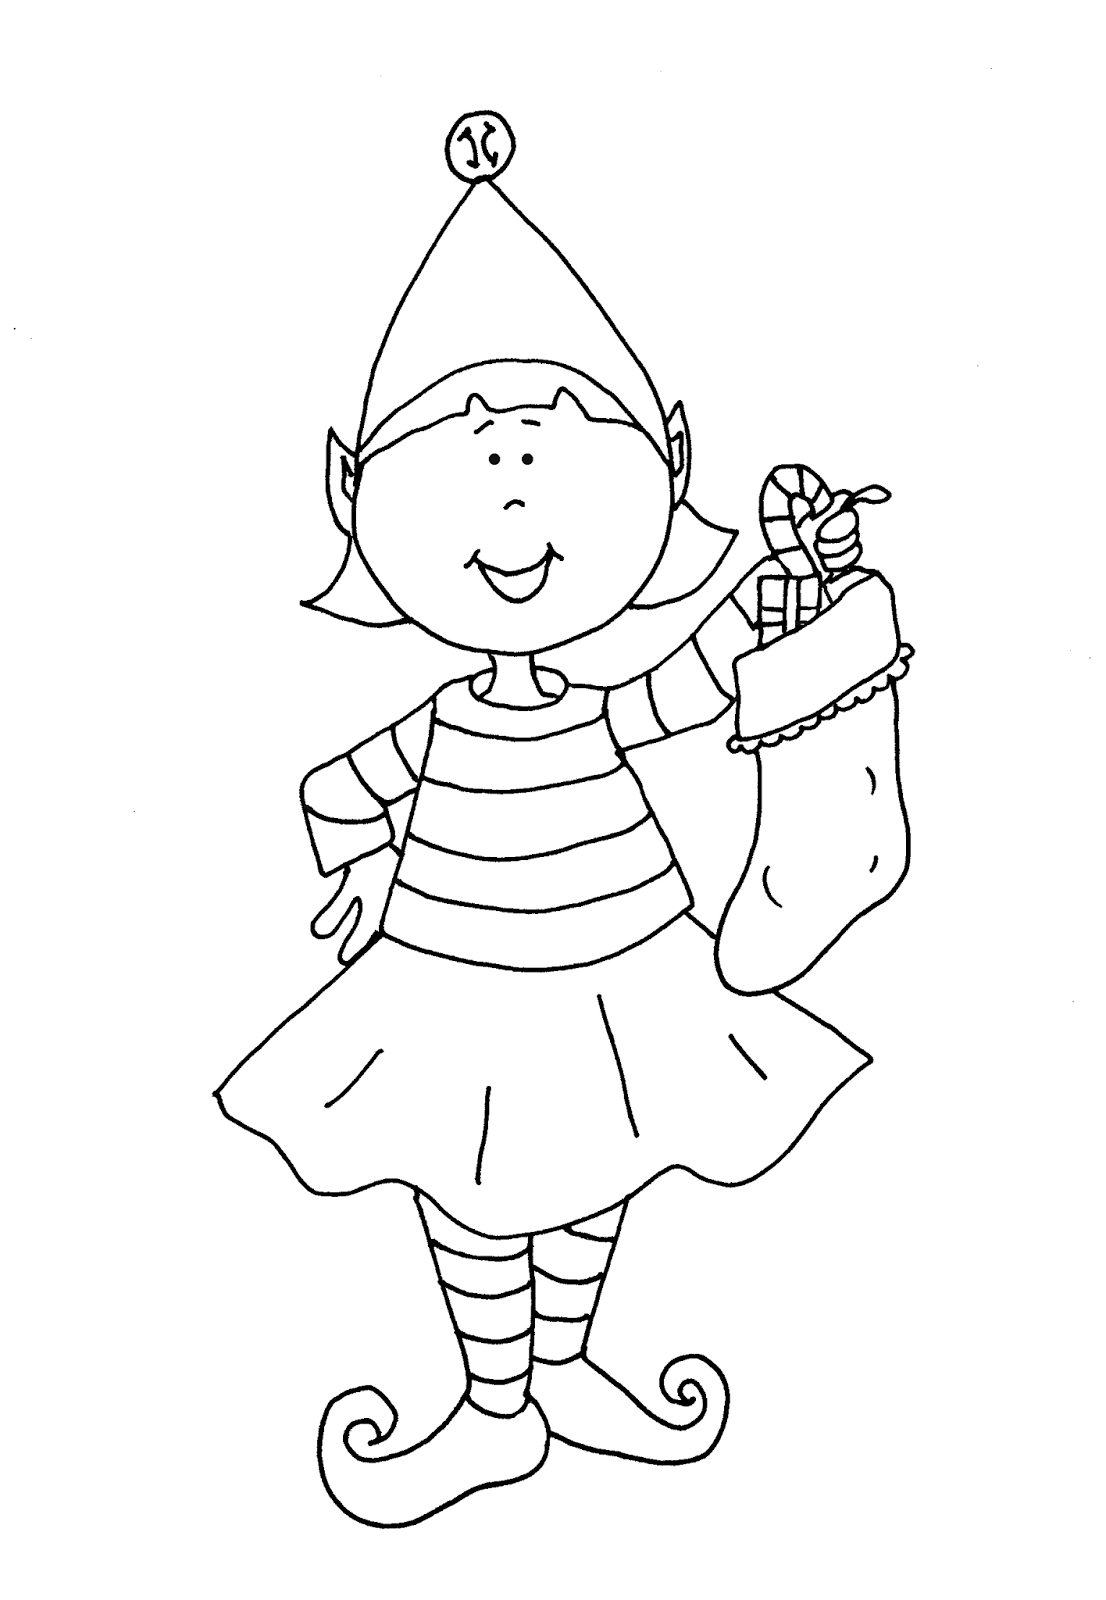 download-free-printable-elf-on-the-shelf-props-the-elf-on-the-shelf